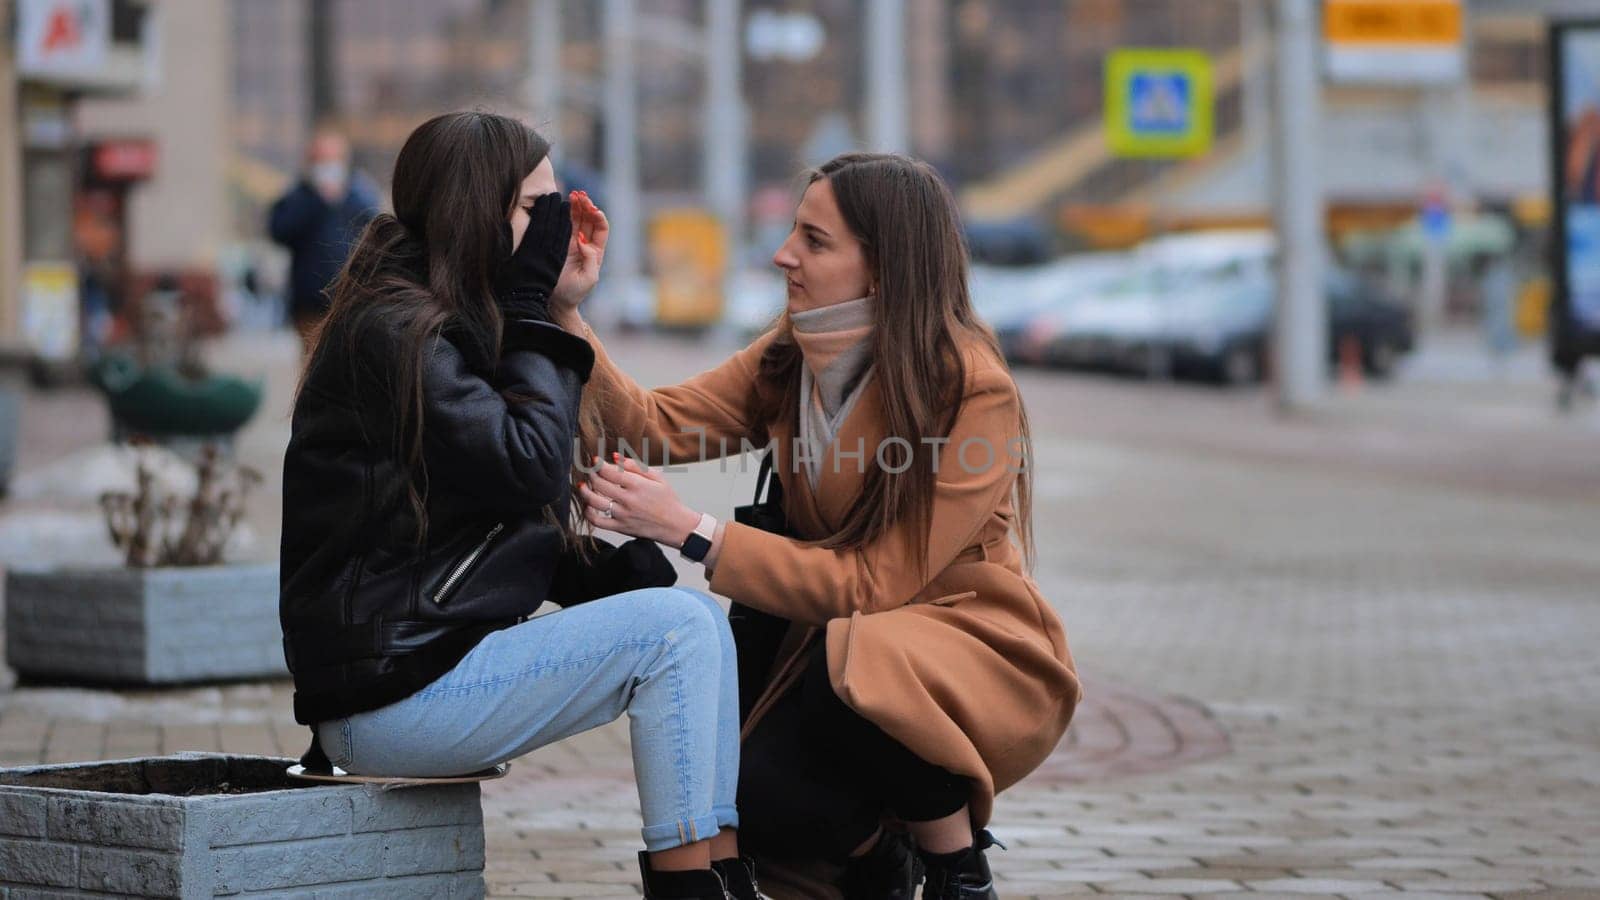 A girl calms a desperate girl on the street. by DovidPro